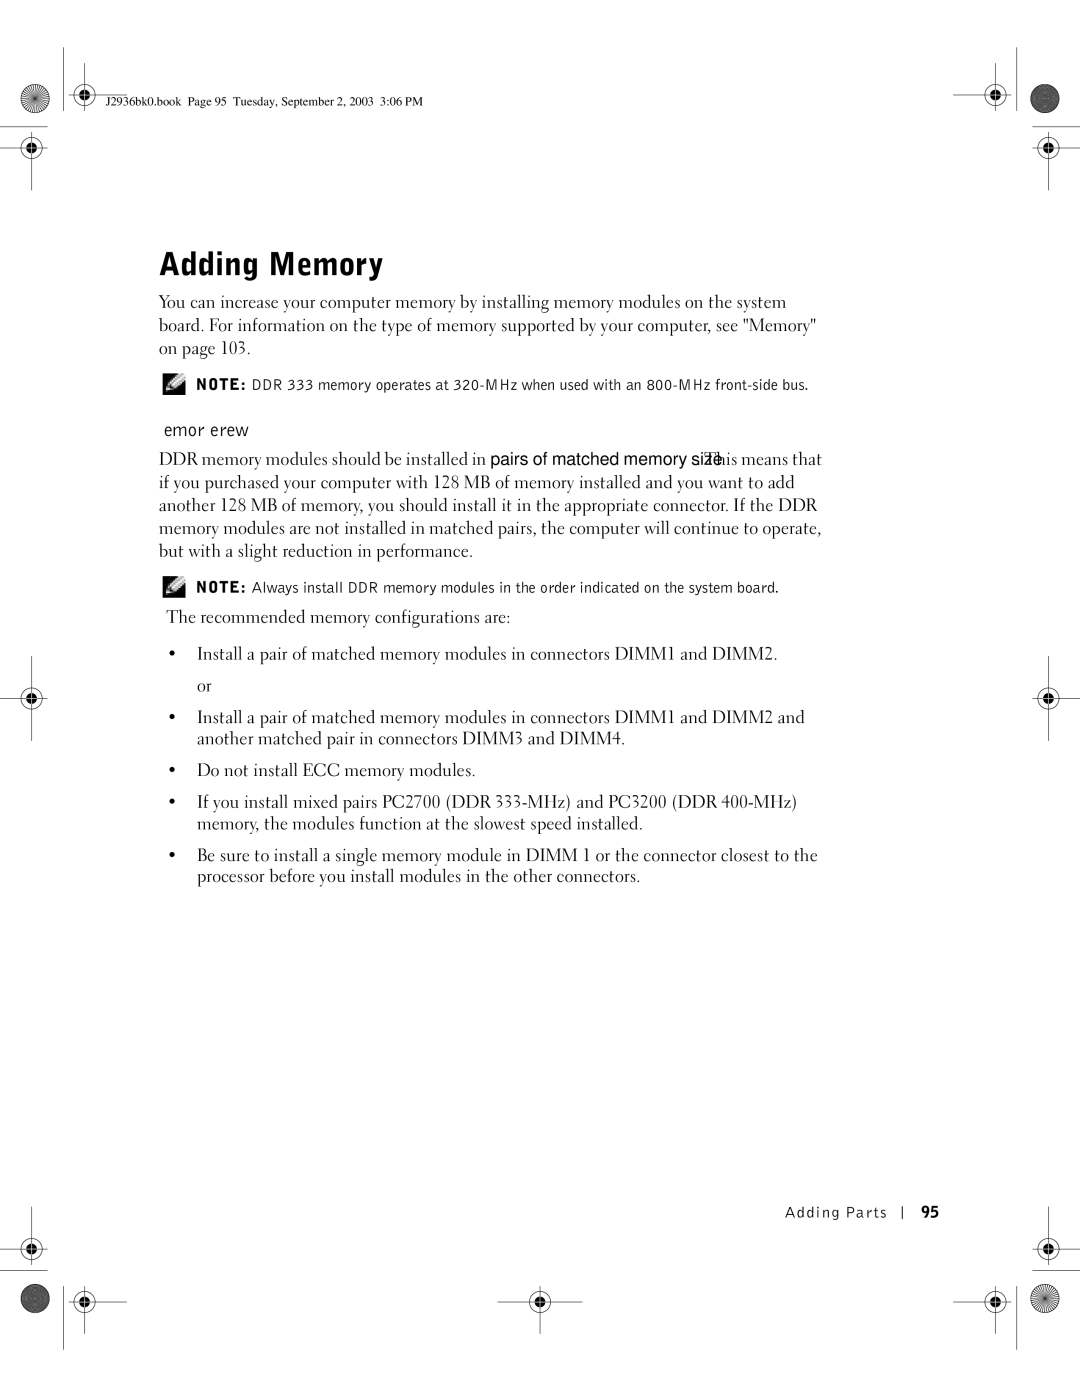 Dell J2936 manual Adding Memory, DDR Memory Overview 